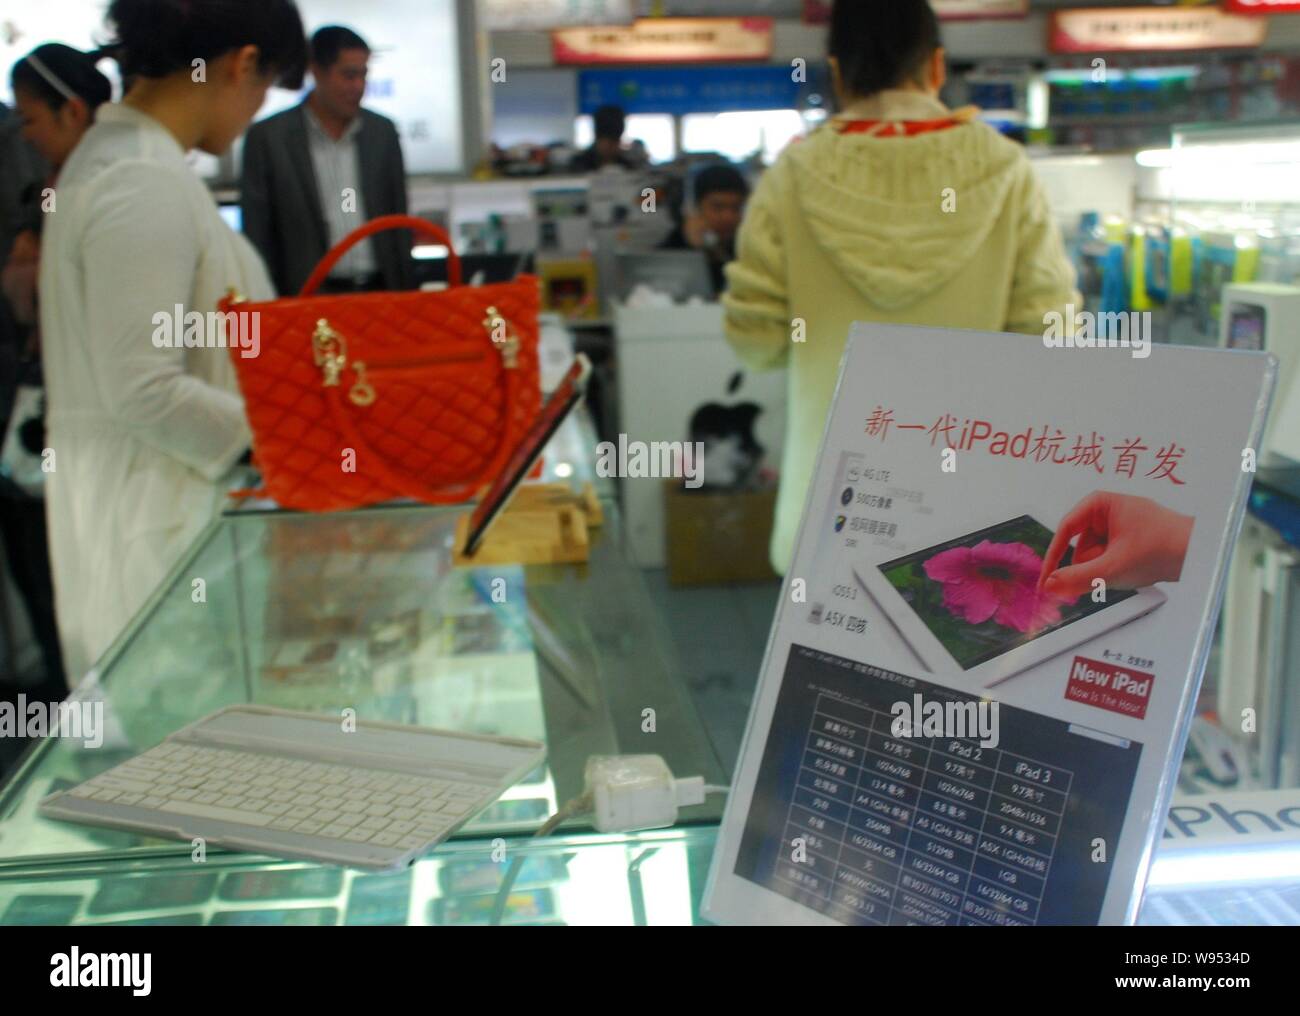 --File--A billboard of the New iPad is seen on a counter at a market in Hangzhou, east Chinas Zhejiang province, 18 March 2012.    Apple Incs new iPad Stock Photo